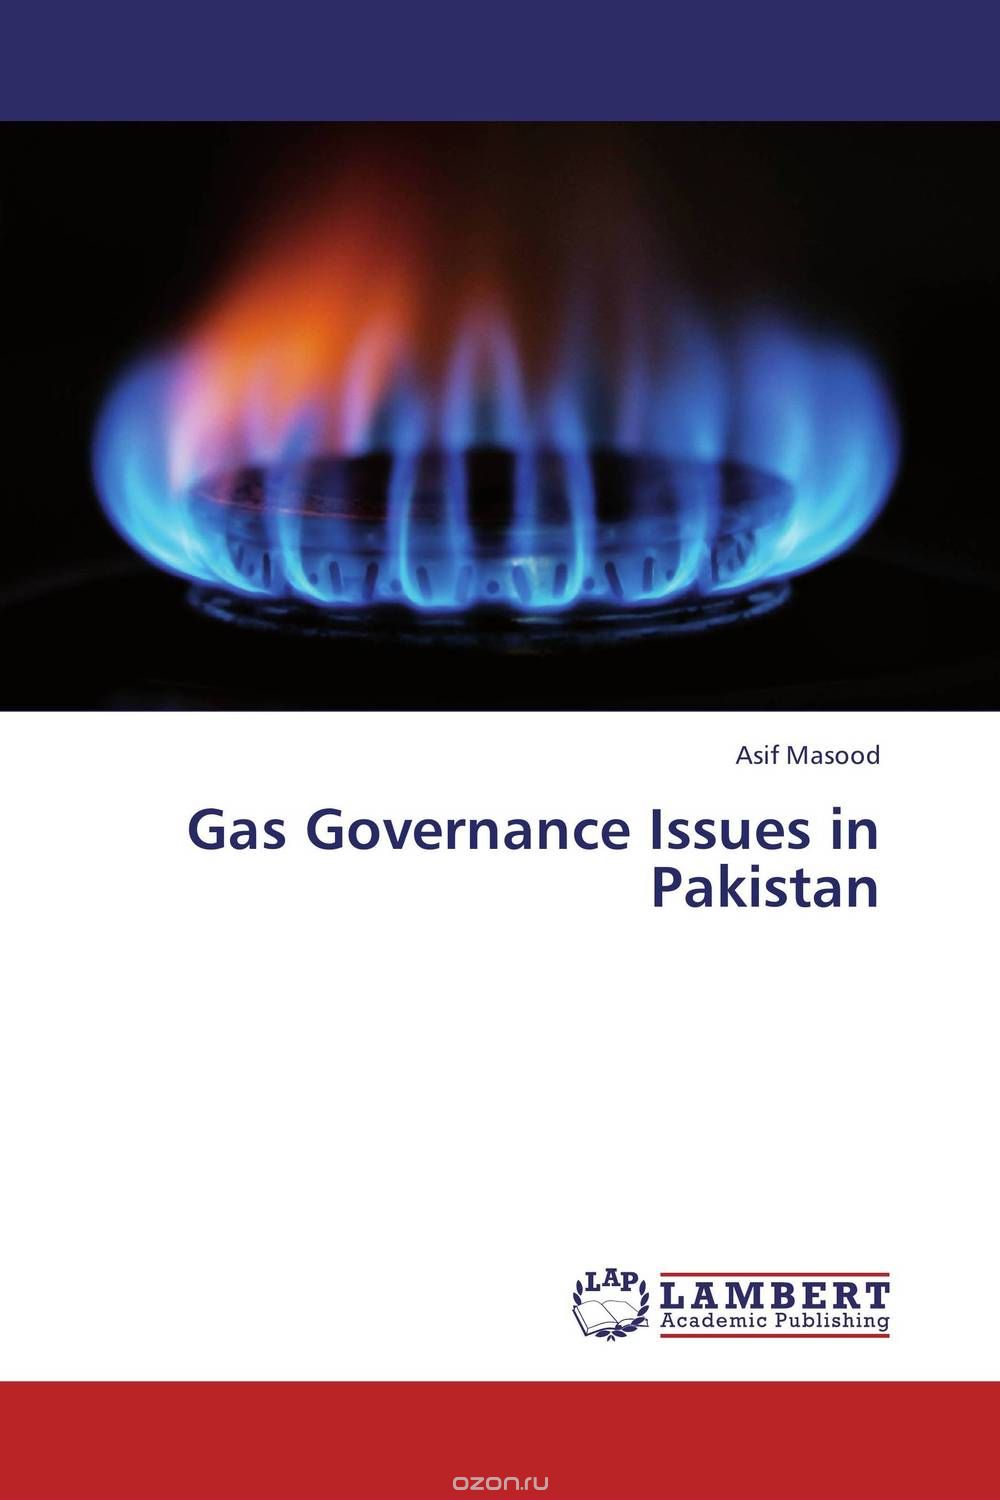 Gas Governance Issues in Pakistan